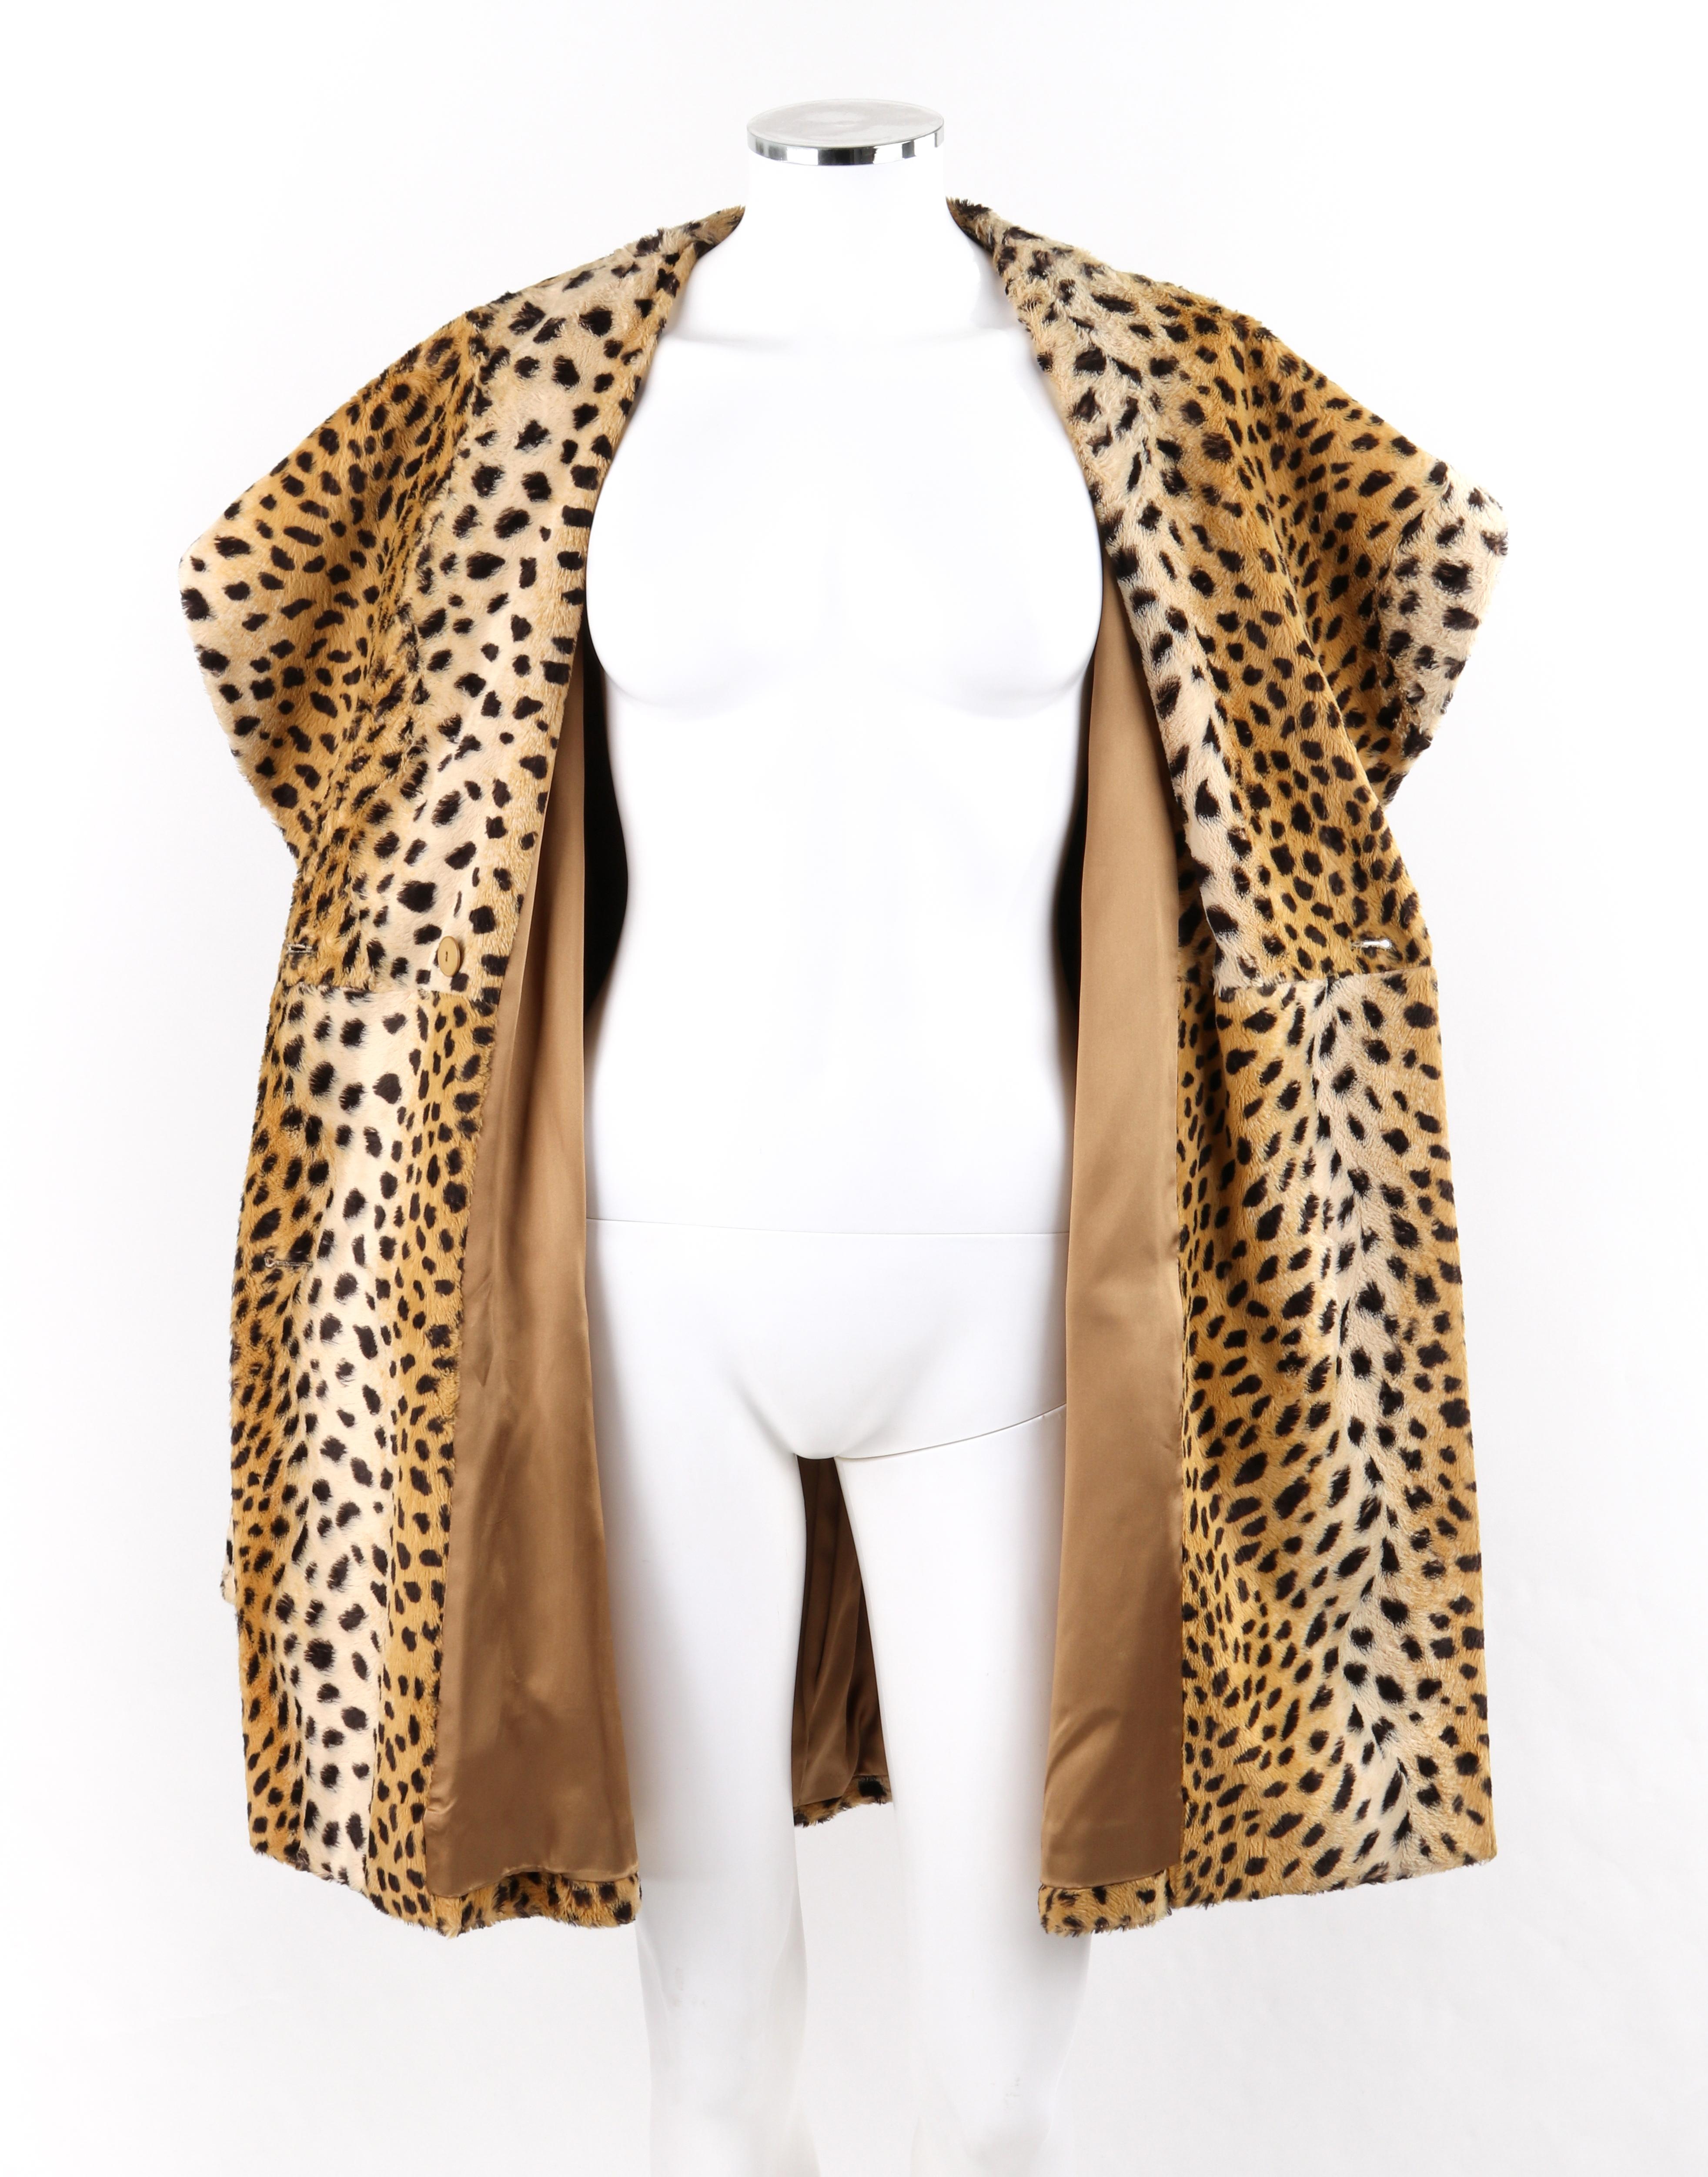 GIVENCHY COUTURE A/W 1997 ALEXANDER McQUEEN Cheetah Print Faux Fur Paneled Coat In Good Condition For Sale In Thiensville, WI